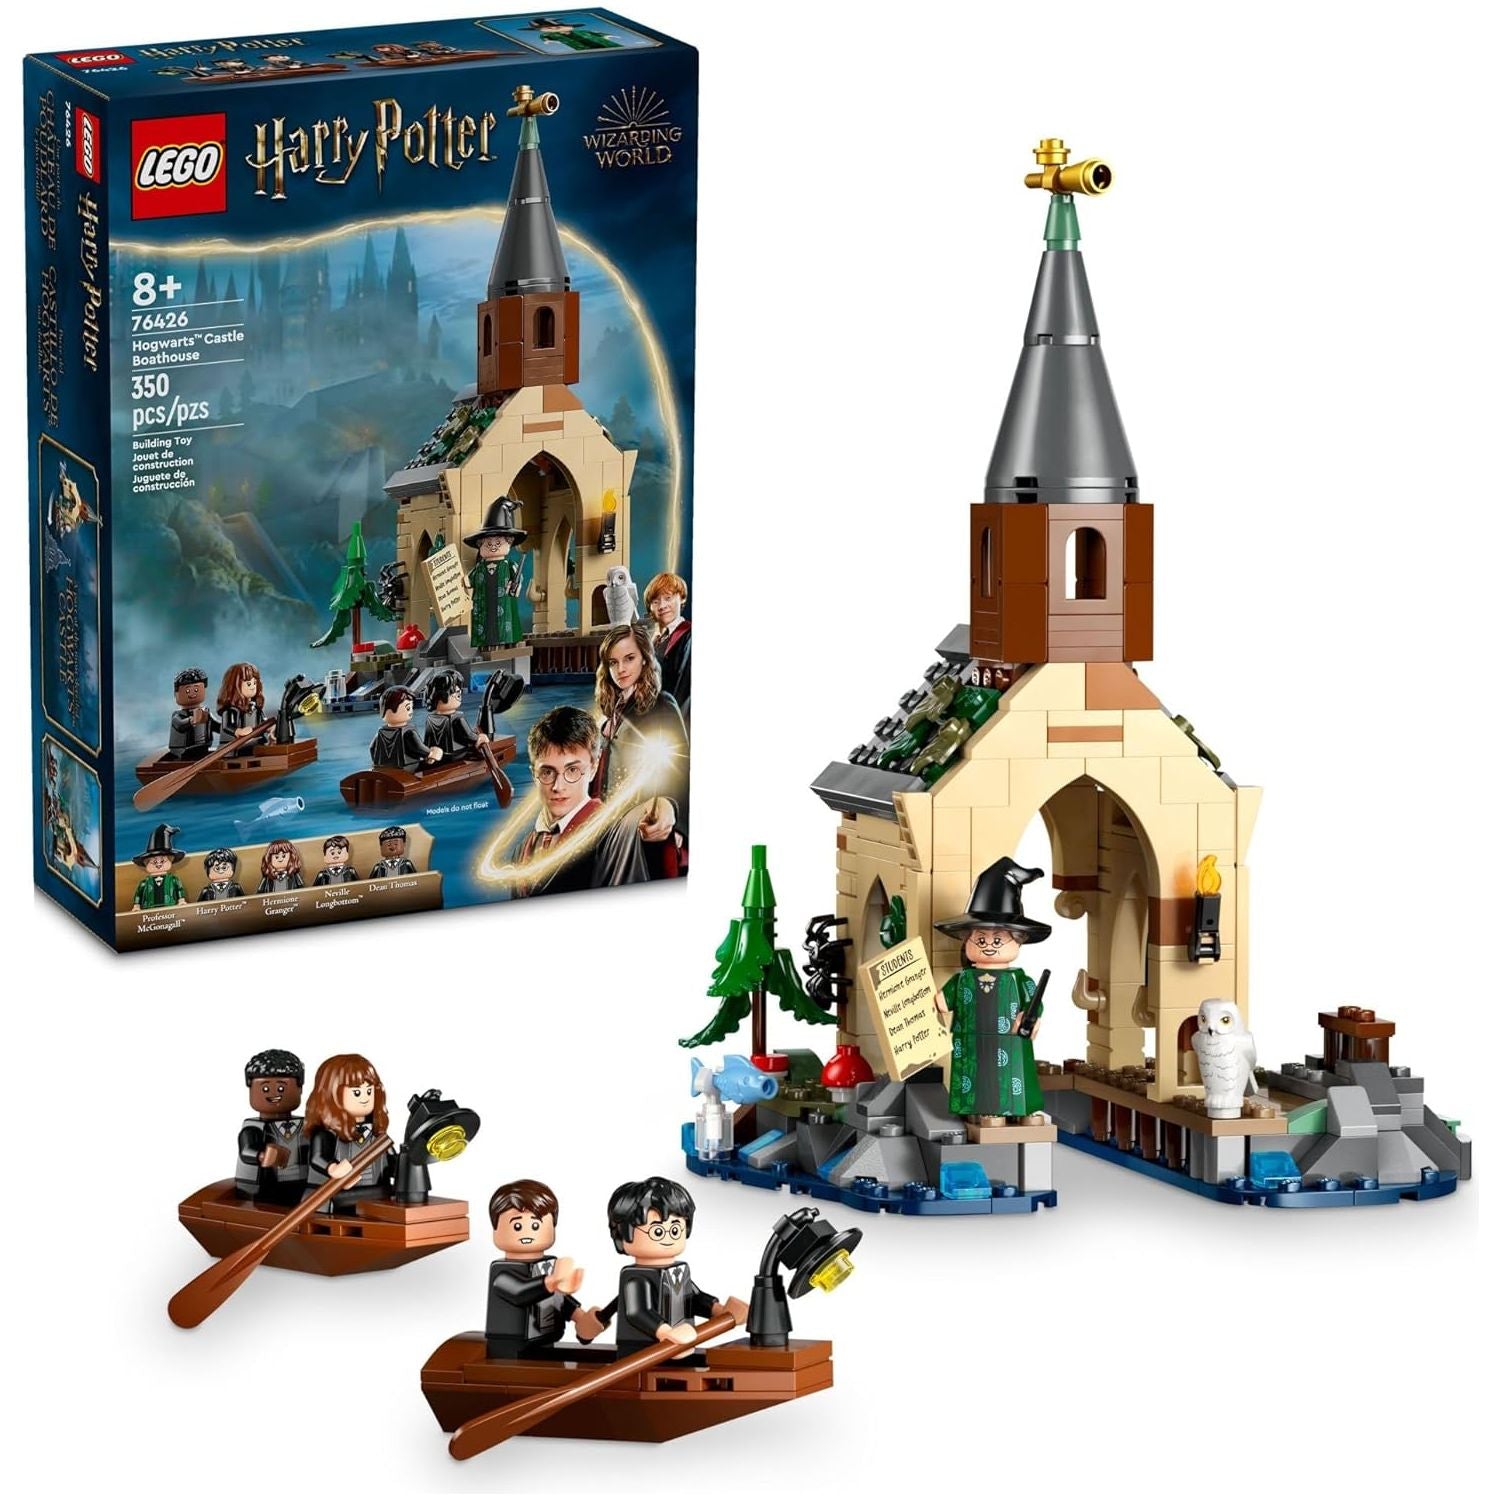 LEGO 76426 Harry Potter Hogwarts Castle Boathouse, Fantasy Harry Potter Toy for Boys and Girls with 2 Buildable Boats and 5 Minifigures, Castle Toy .